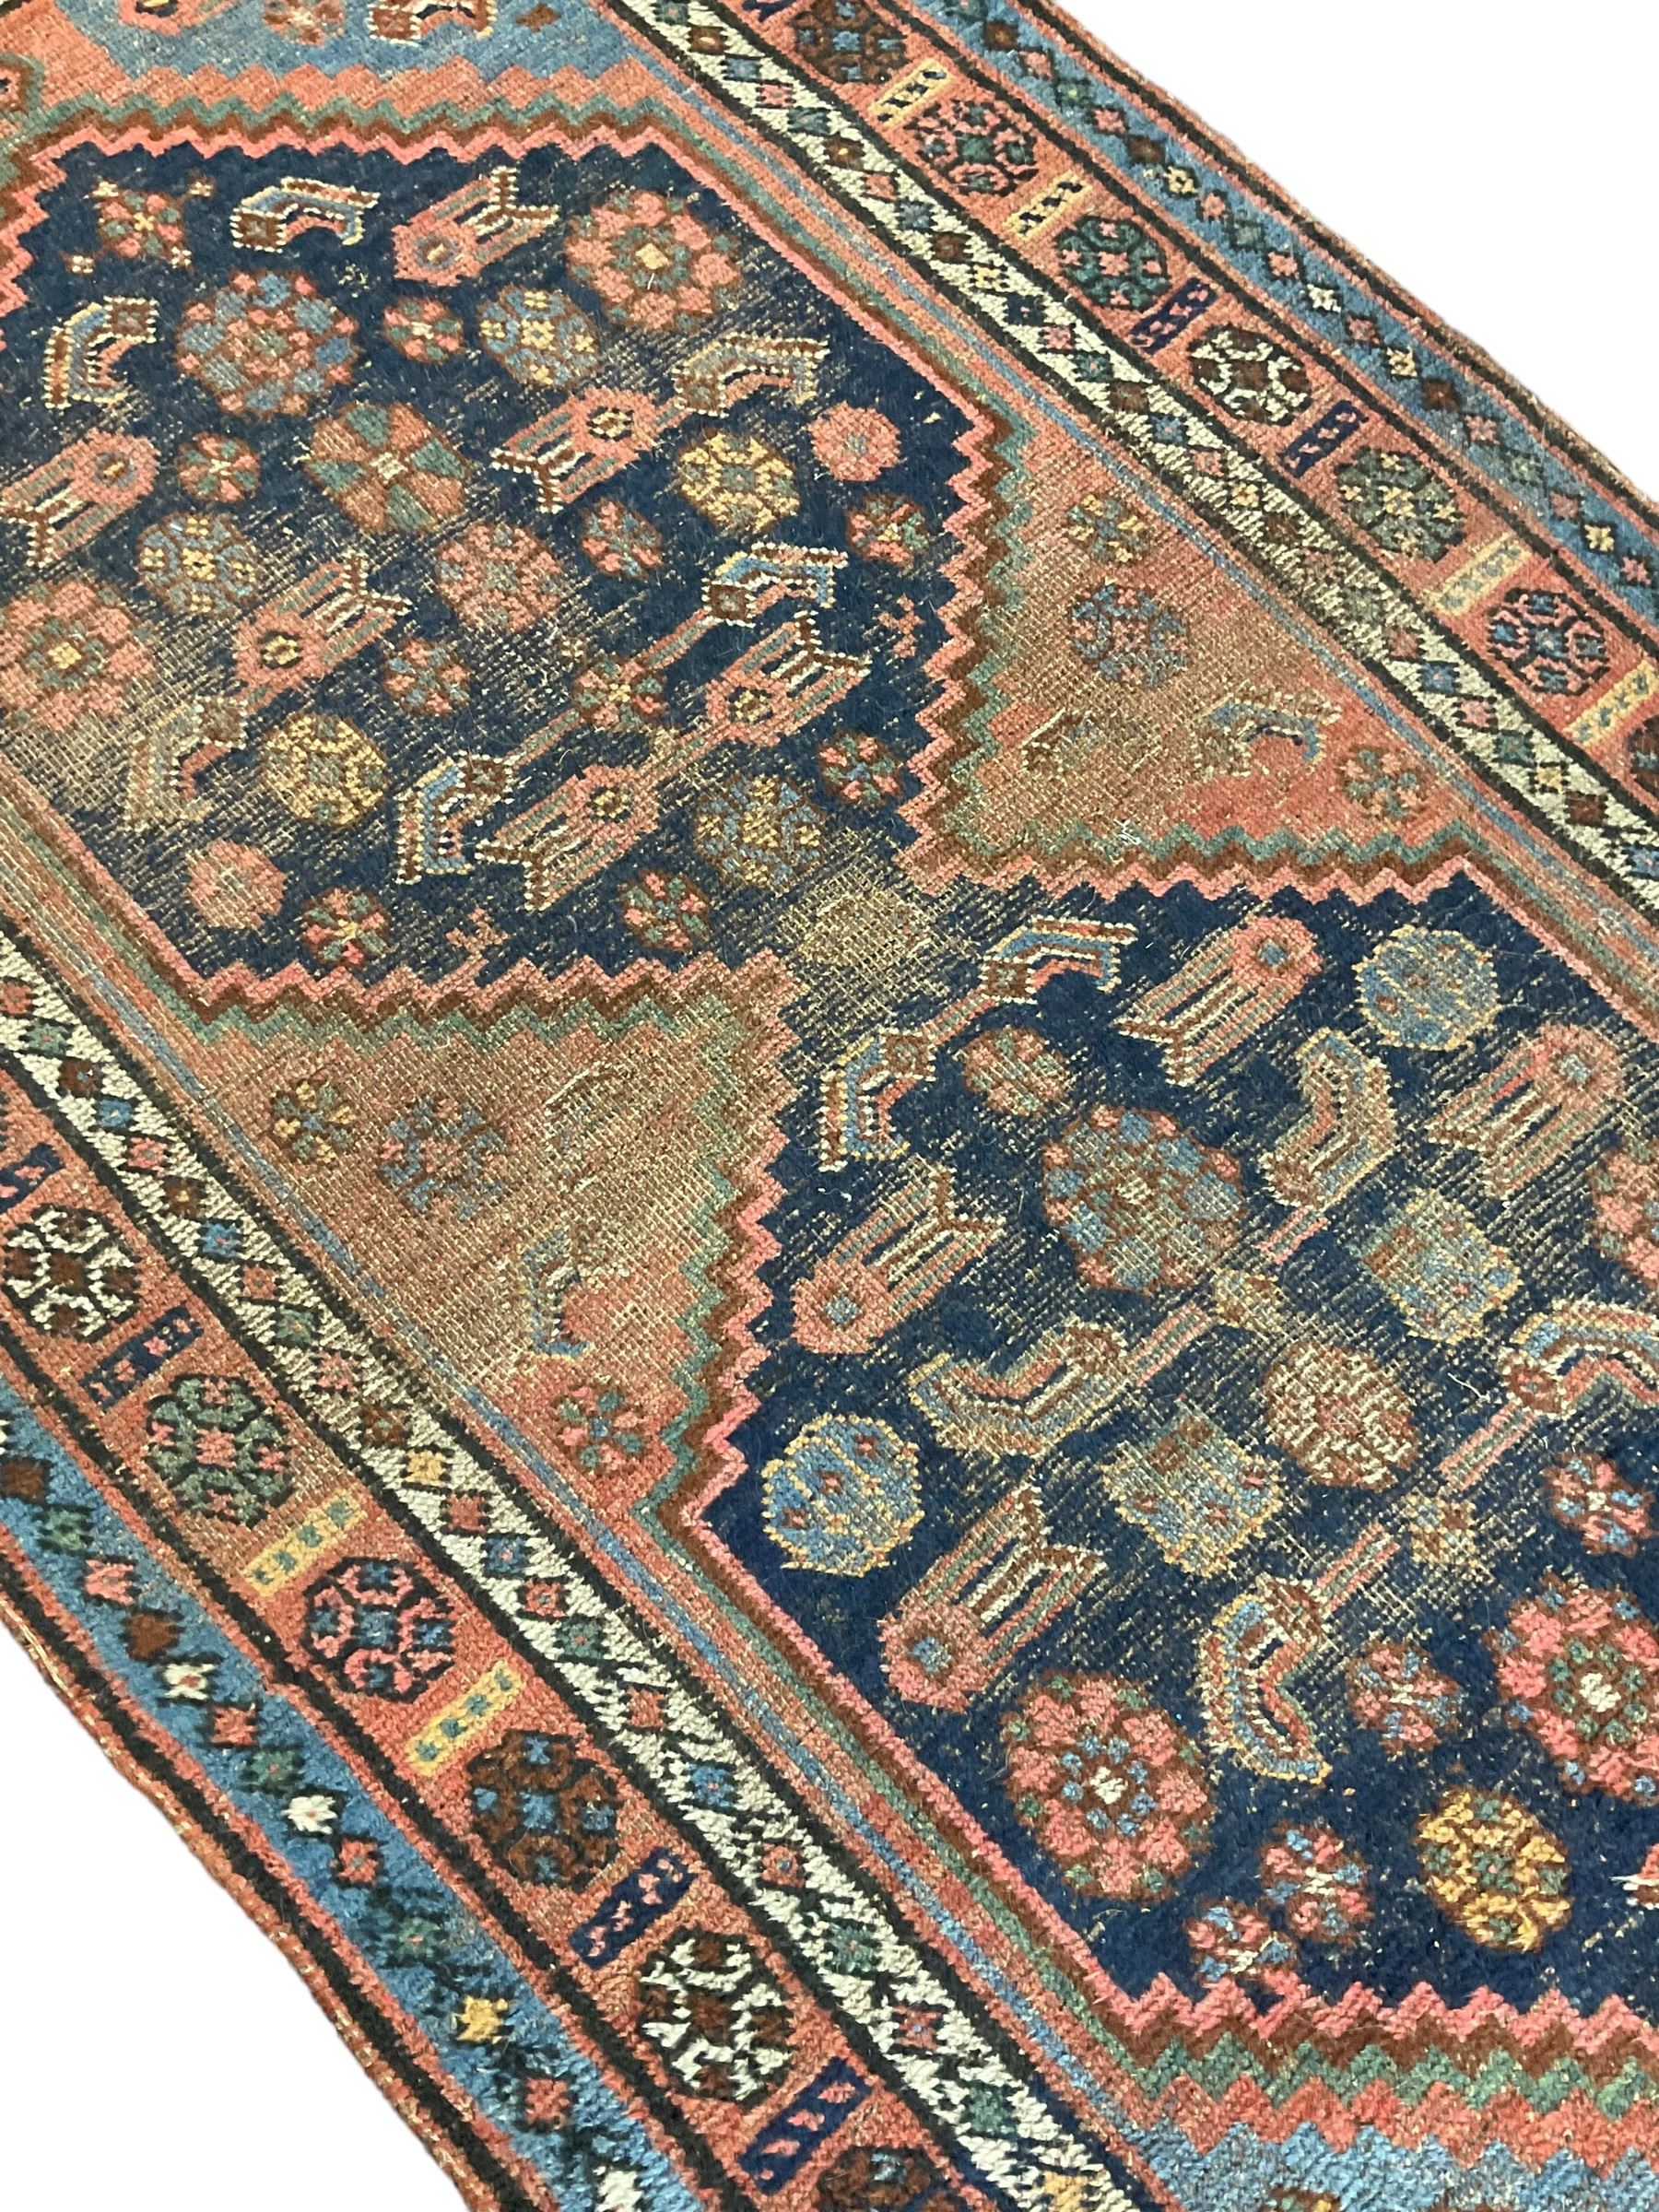 Old Persian rug - Image 4 of 6